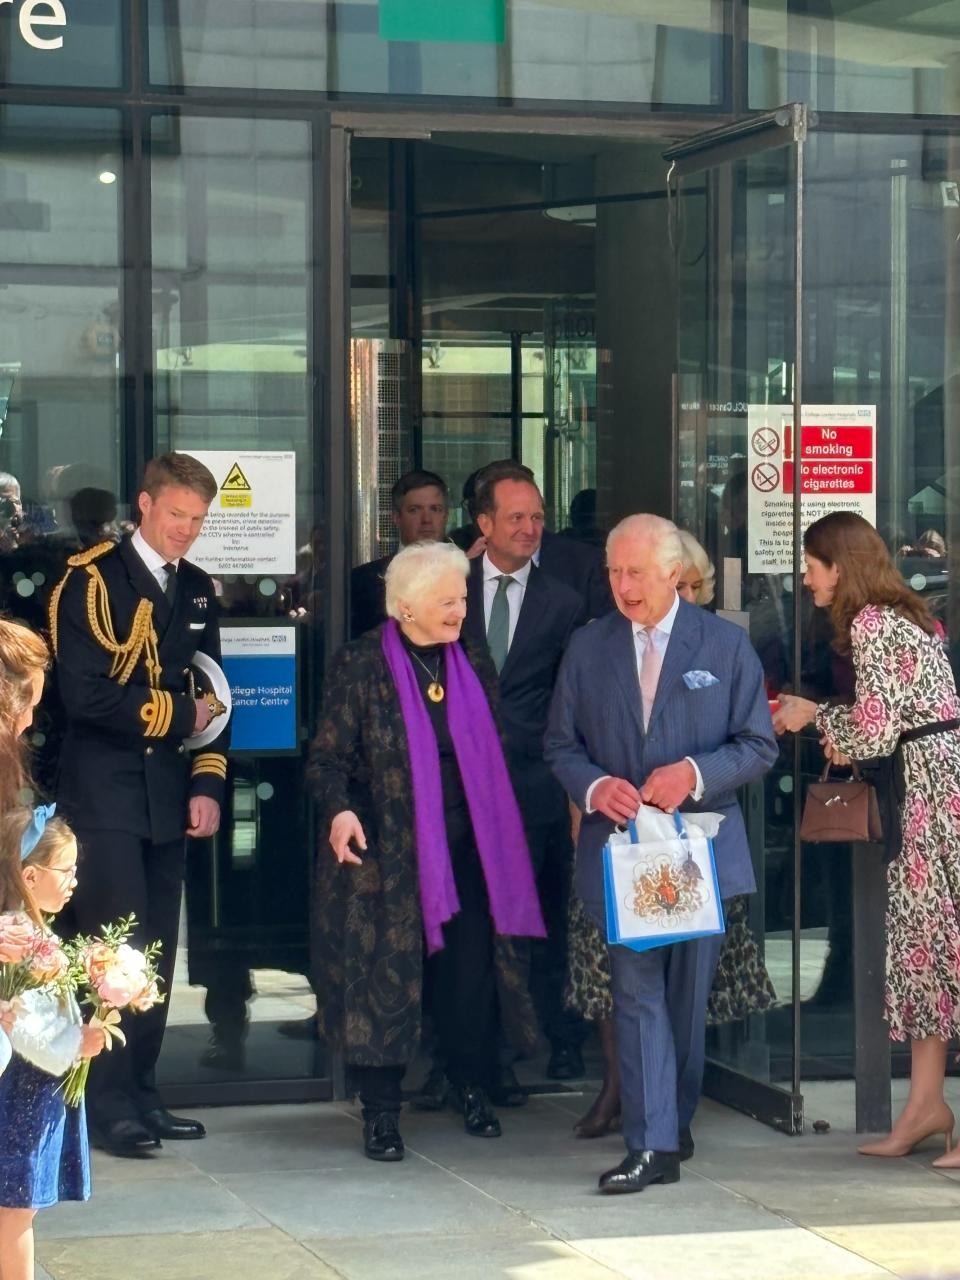 The King was all smiles at his first public engagement since his cancer diagnosis (The Independent)